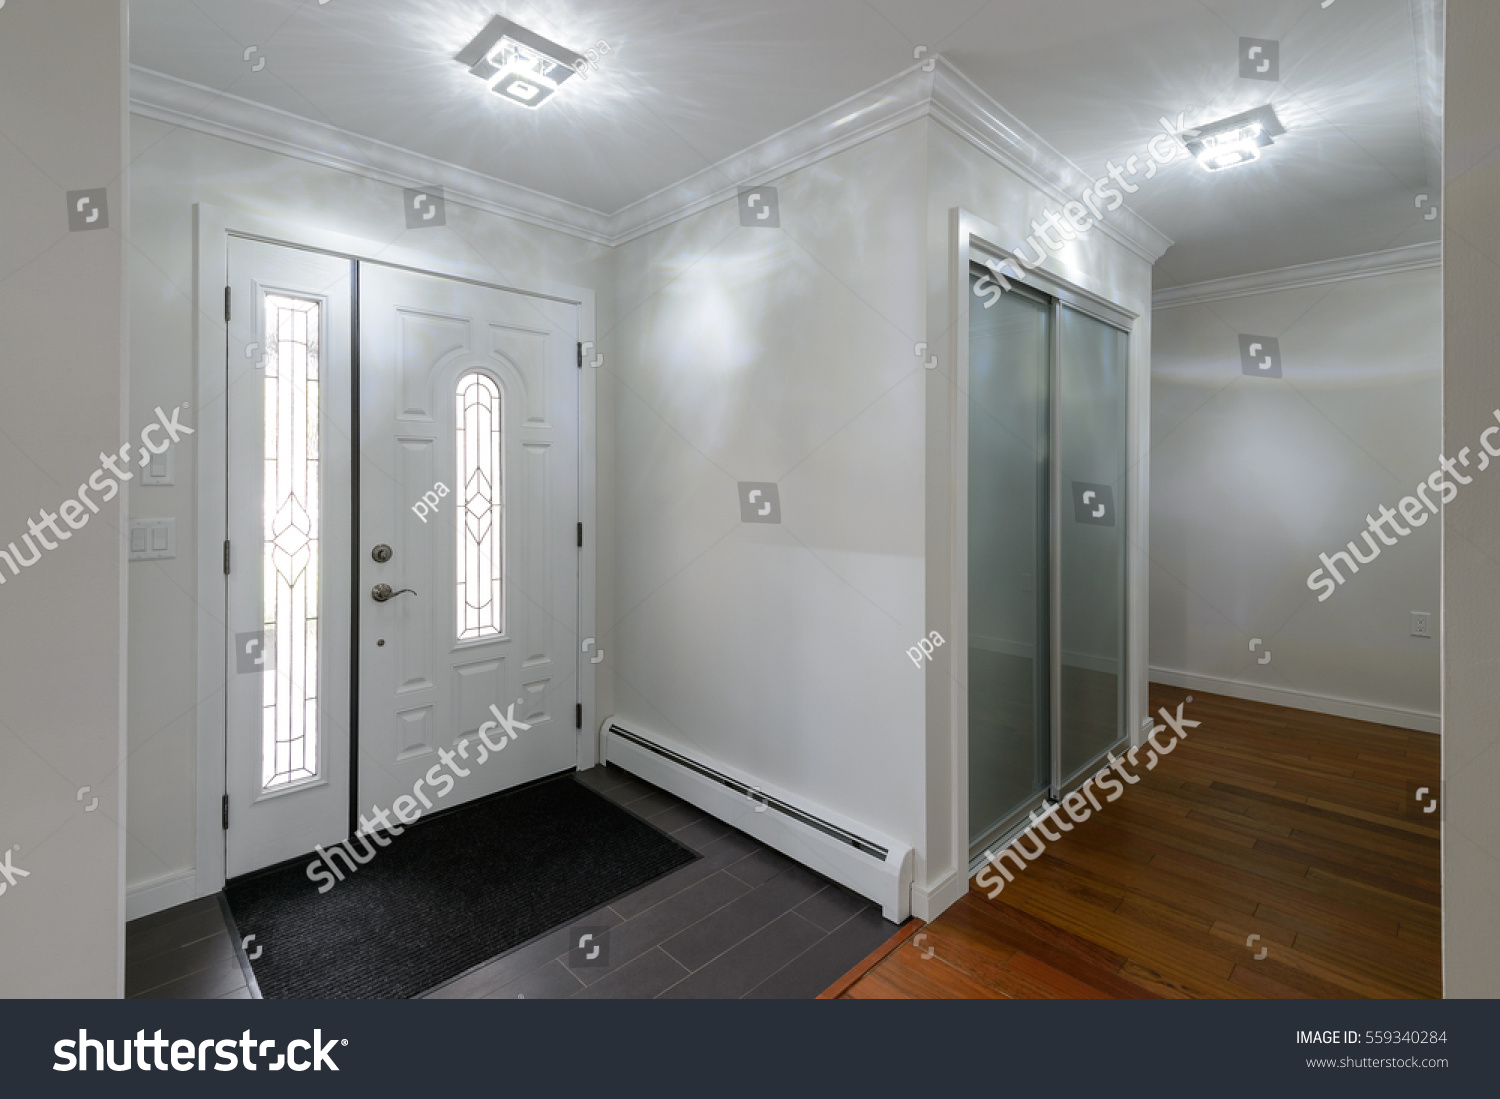 Front Door Entrance Hall House Interior Royalty Free Stock